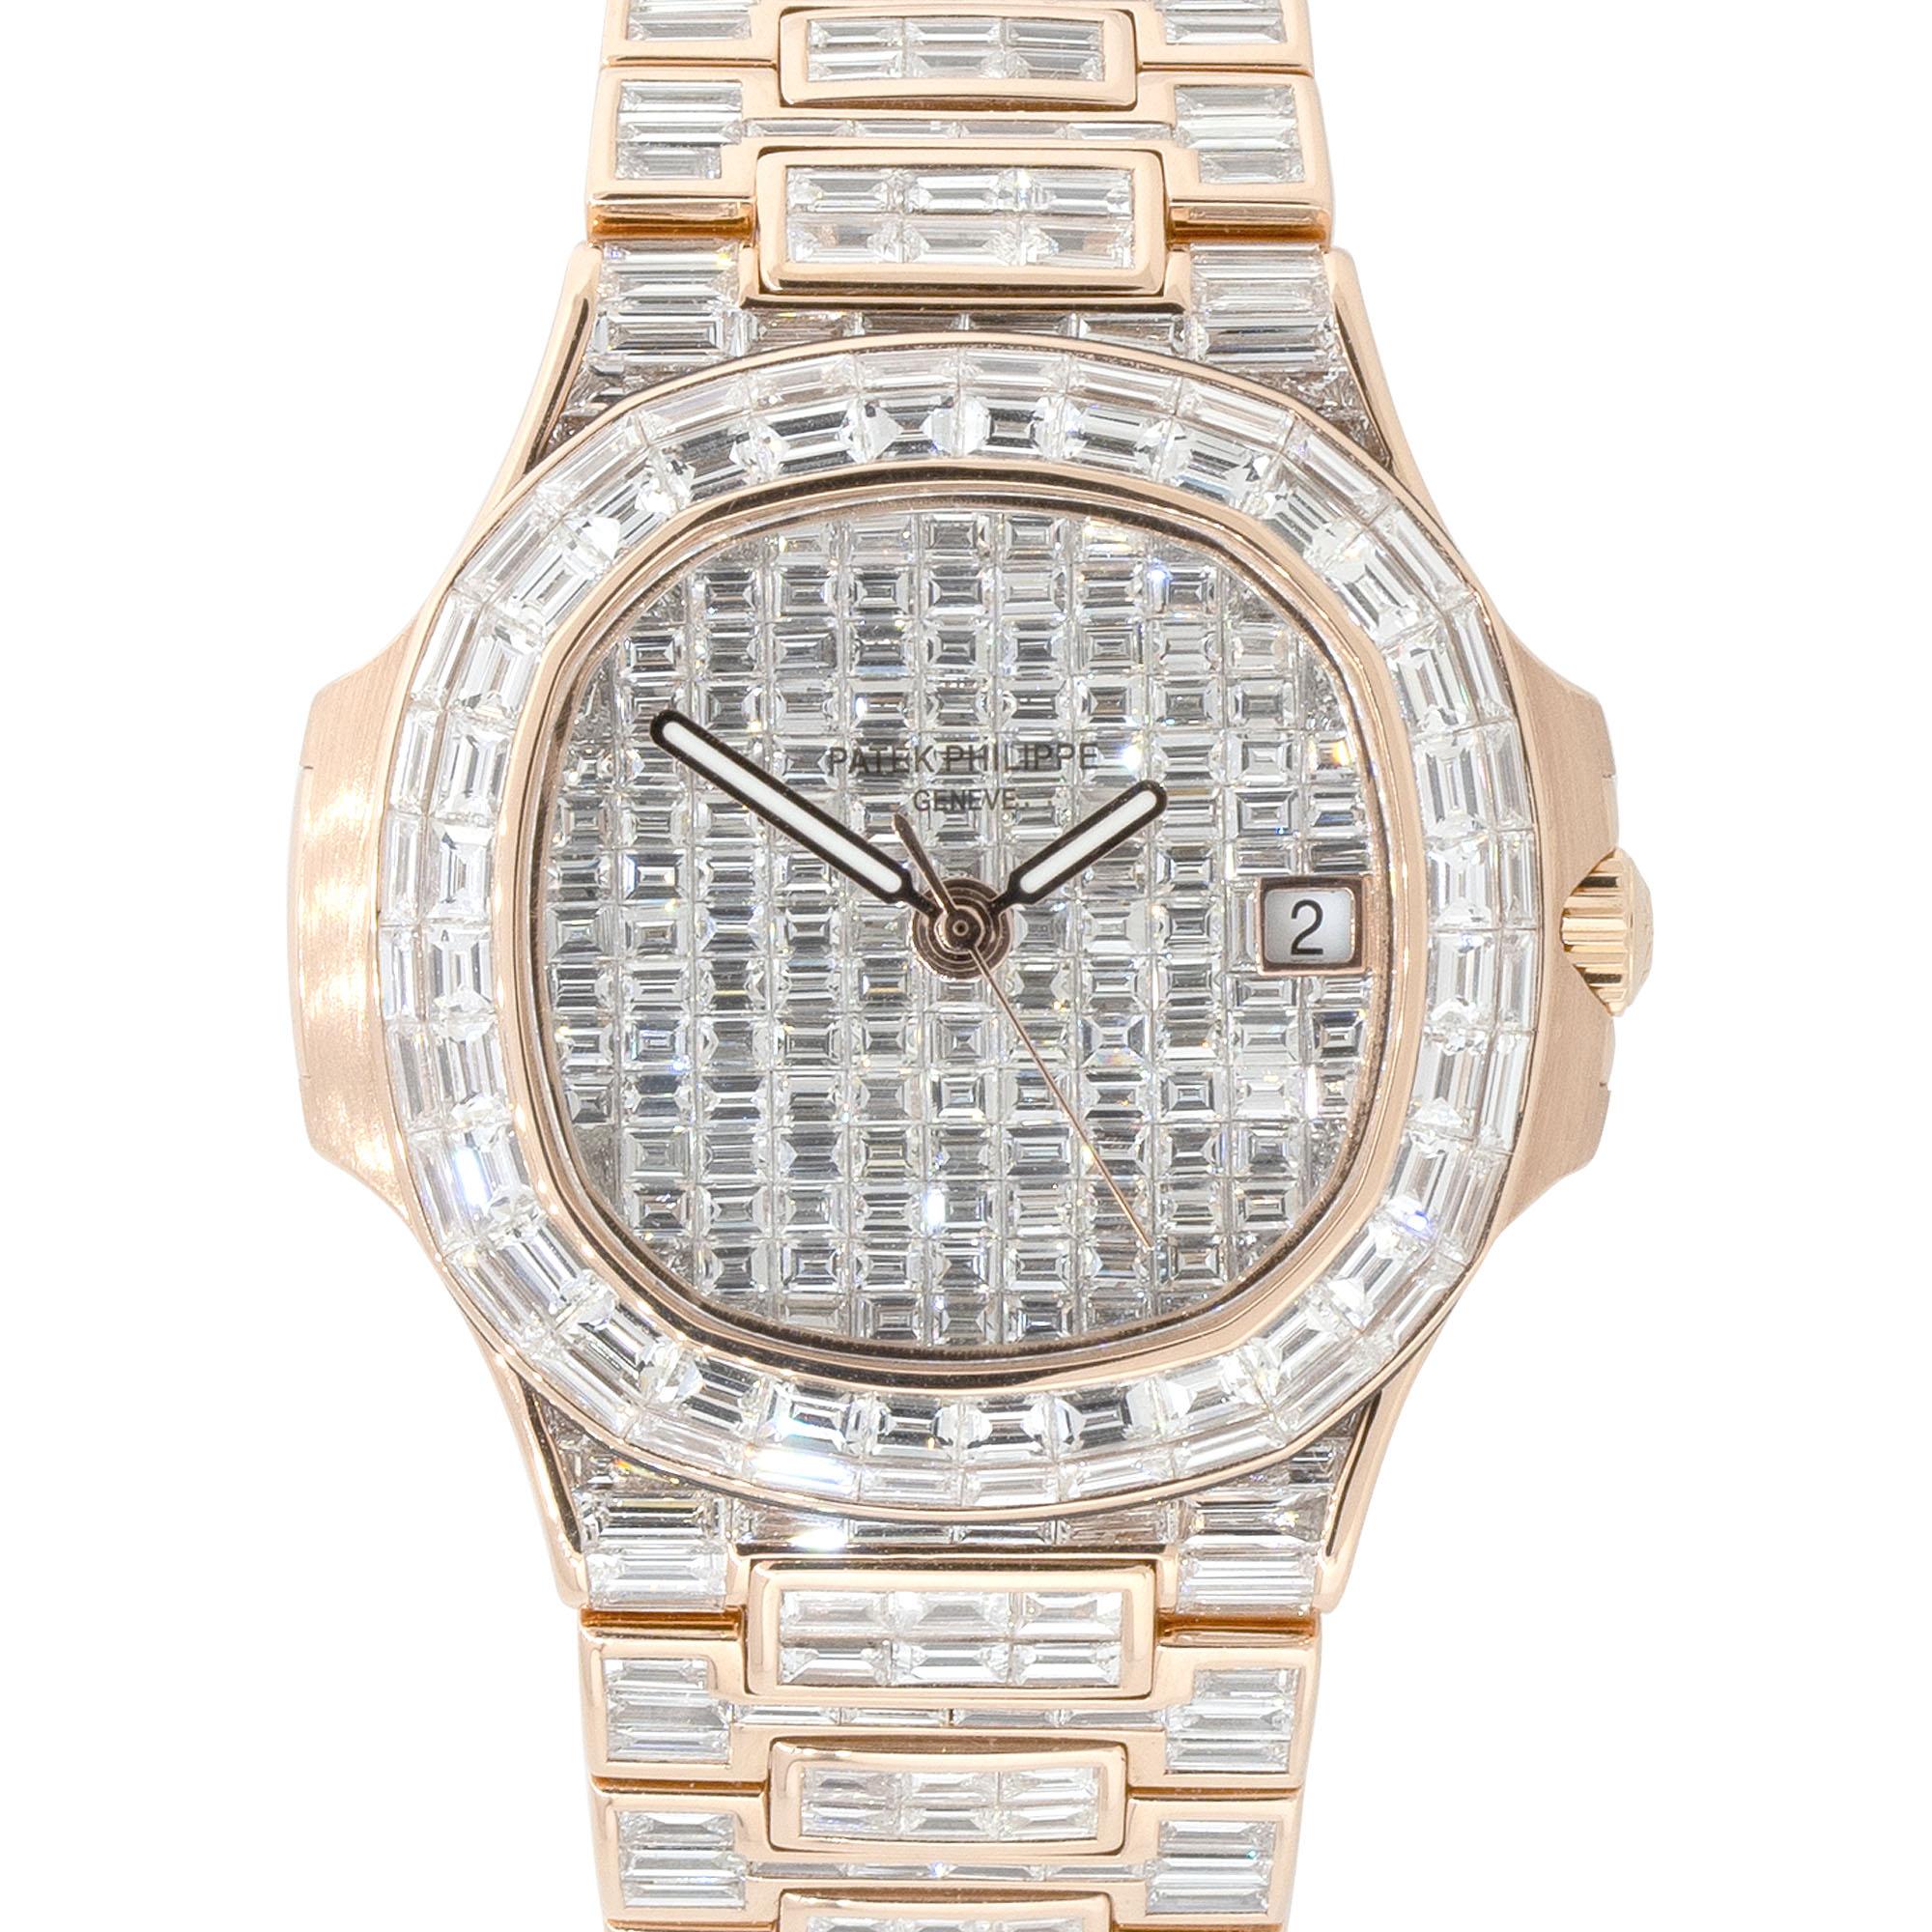 Brand: Patek Philippe
The Patek Philippe Nautilus 18k Rose Gold All Baguette Diamond Watch is a symbol of ultimate luxury, showcasing both the brand's horological expertise and its mastery of jewelry craftsmanship. It's an exquisite timepiece that